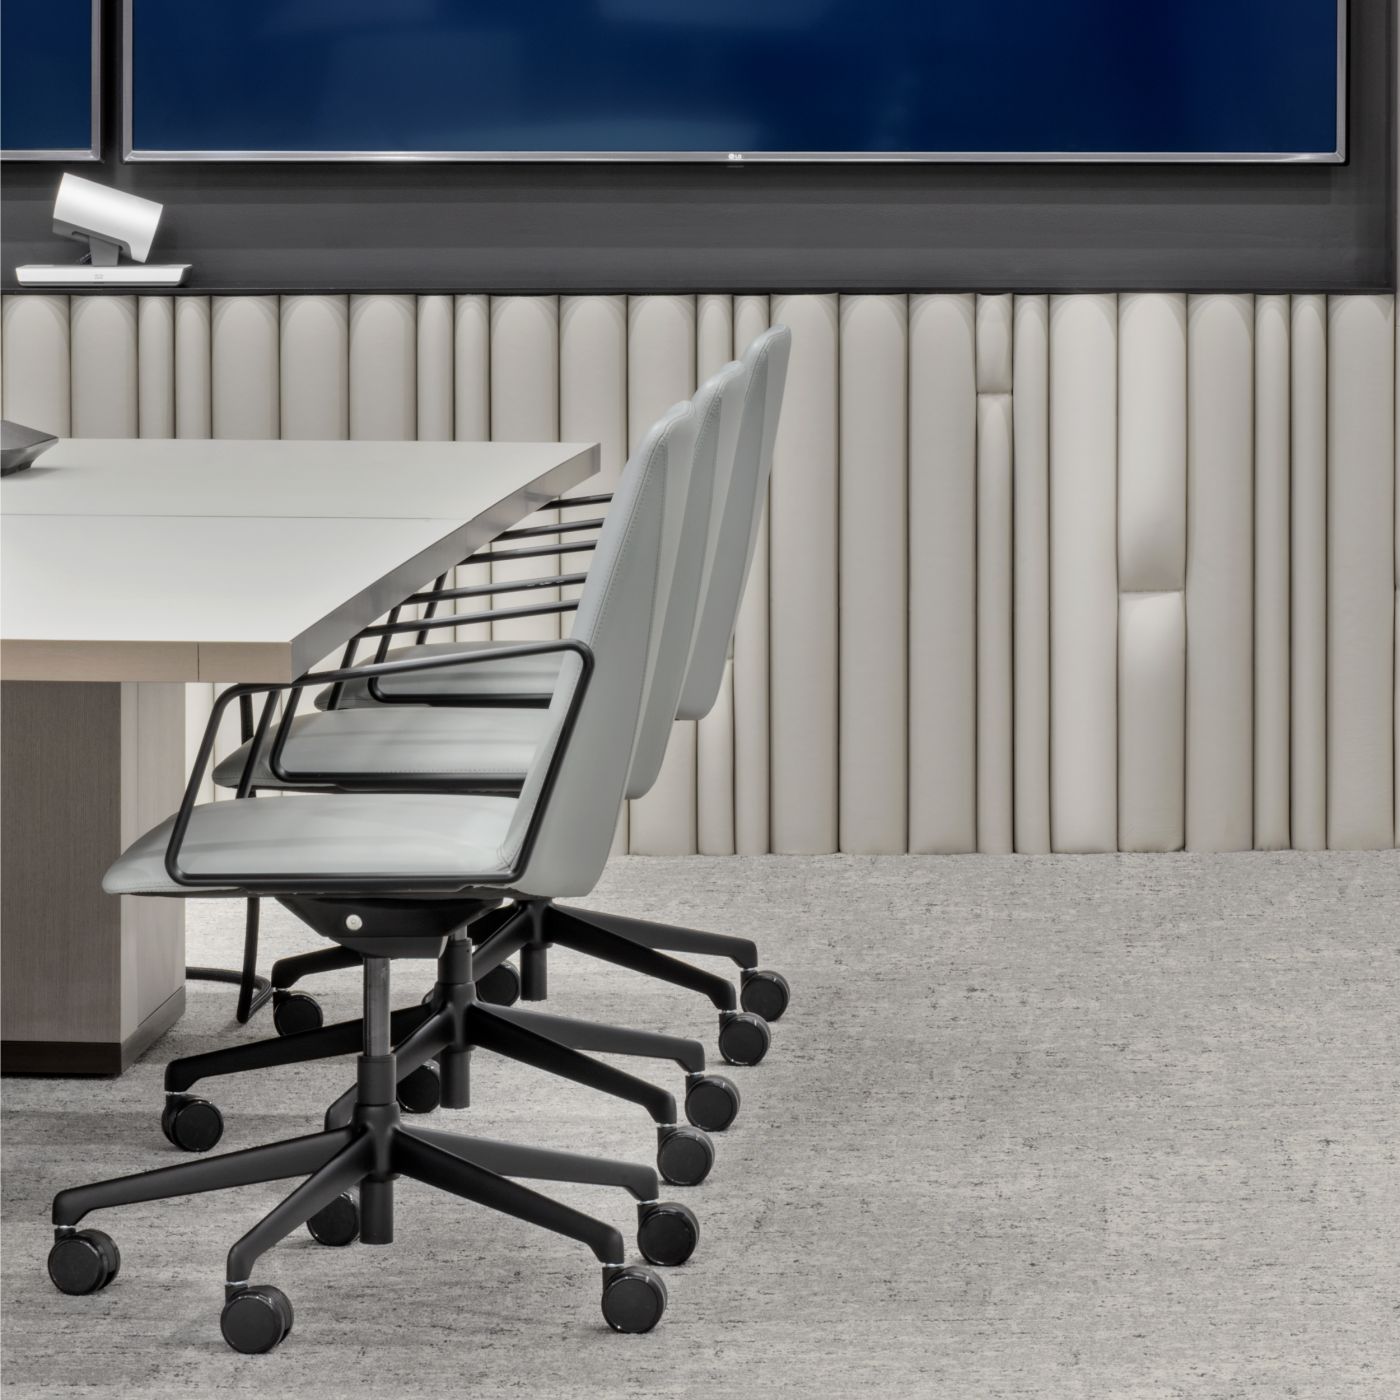 The luxuriously refined palette of the MOTUS tables elevates this reconfigurable space to an executive-level finish.